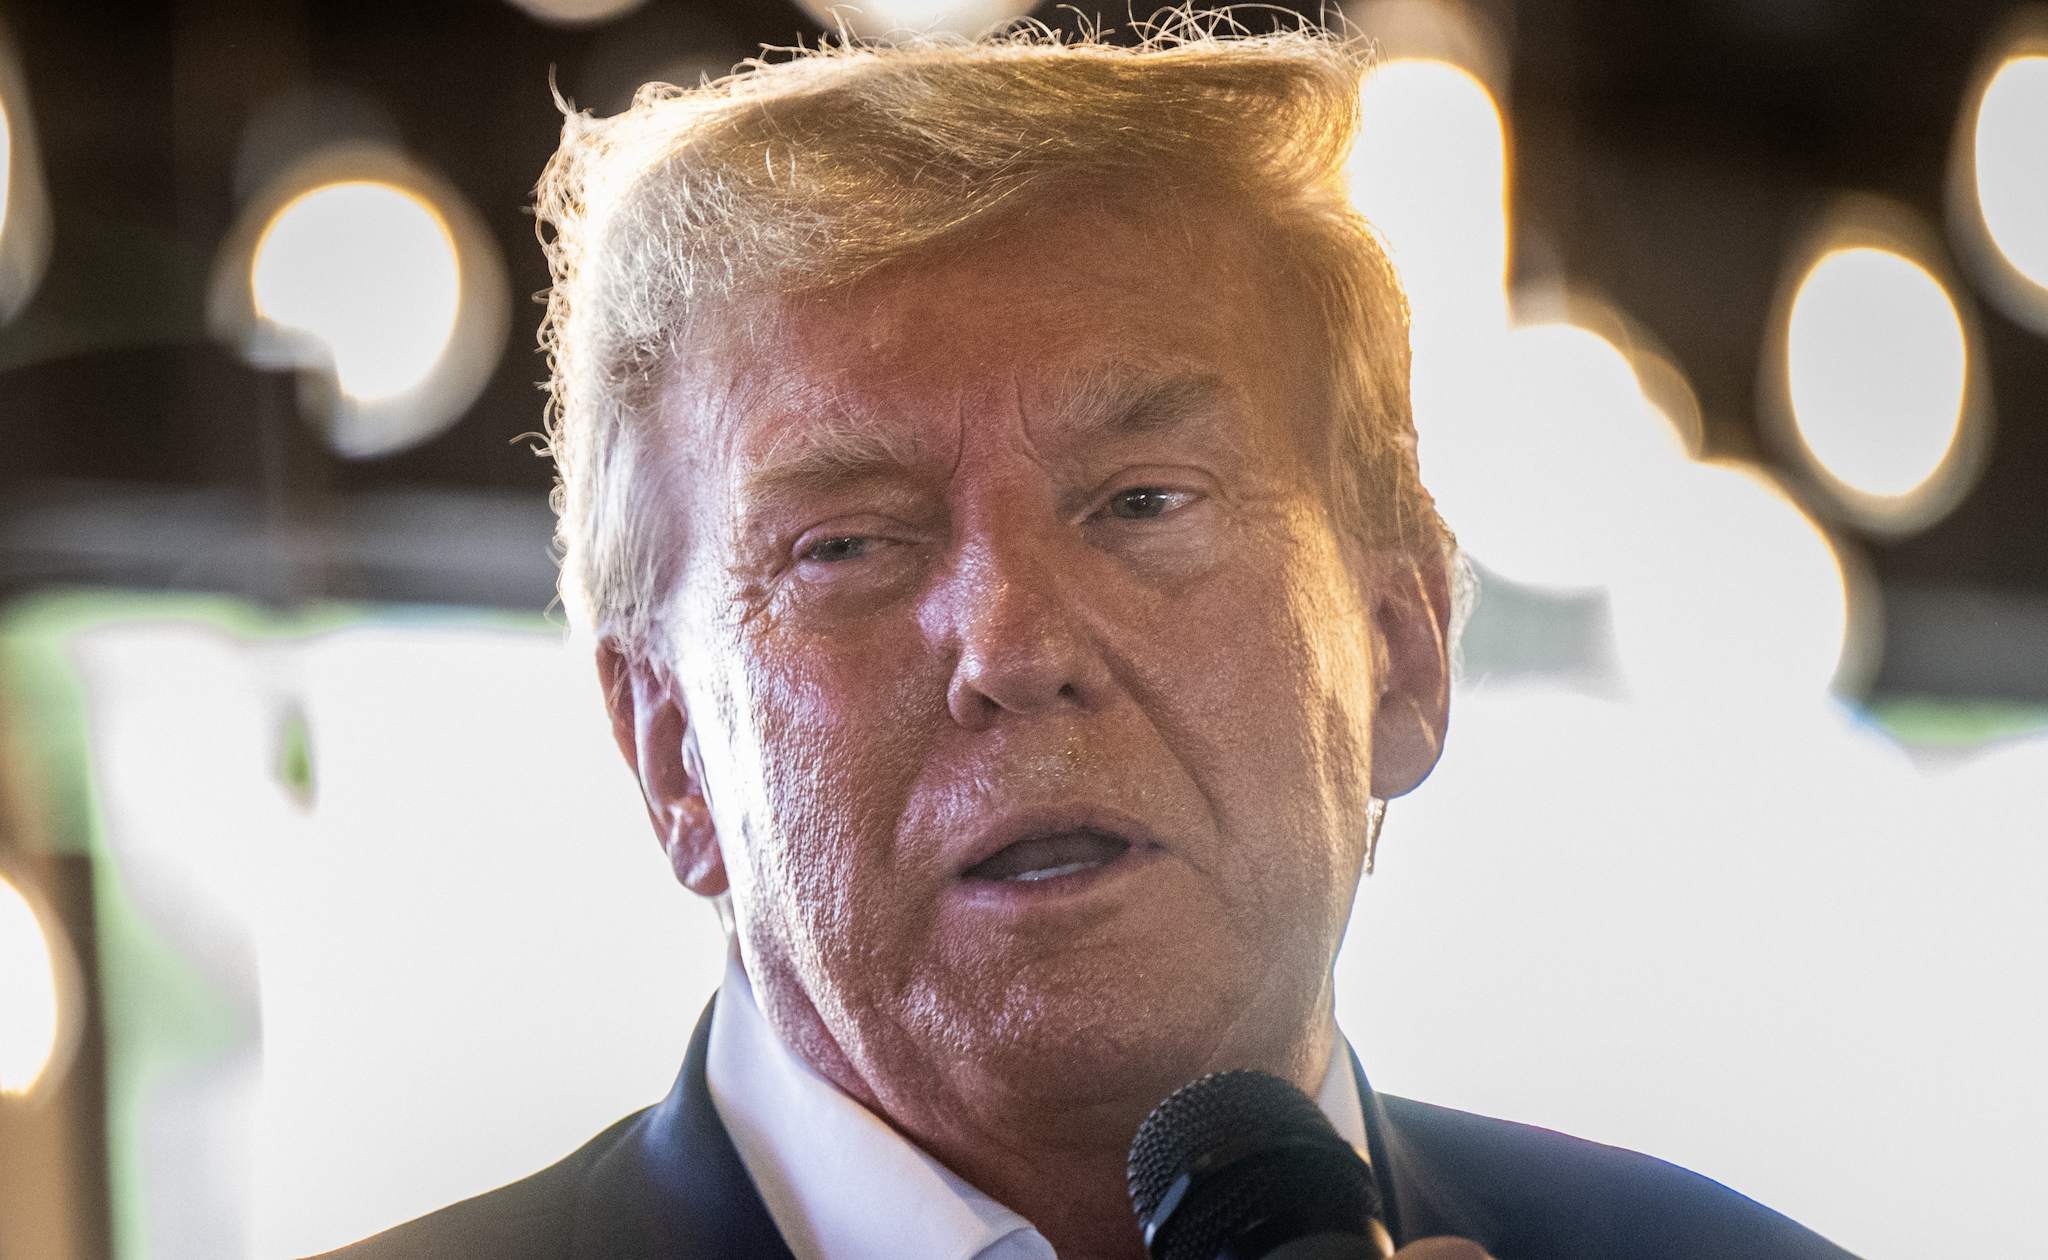 DES MOINES, IOWA - AUGUST 12: Republican presidential candidate and former U.S. President Donald Trump speaks during a rally at the Steer N' Stein bar at the Iowa State Fair on August 12, 2023 in Des Moines, Iowa. Republican and Democratic presidential hopefuls, including Florida Gov. Ron DeSantis, former President Donald Trump are visiting the fair, a tradition in one of the first states to hold caucuses in 2024.